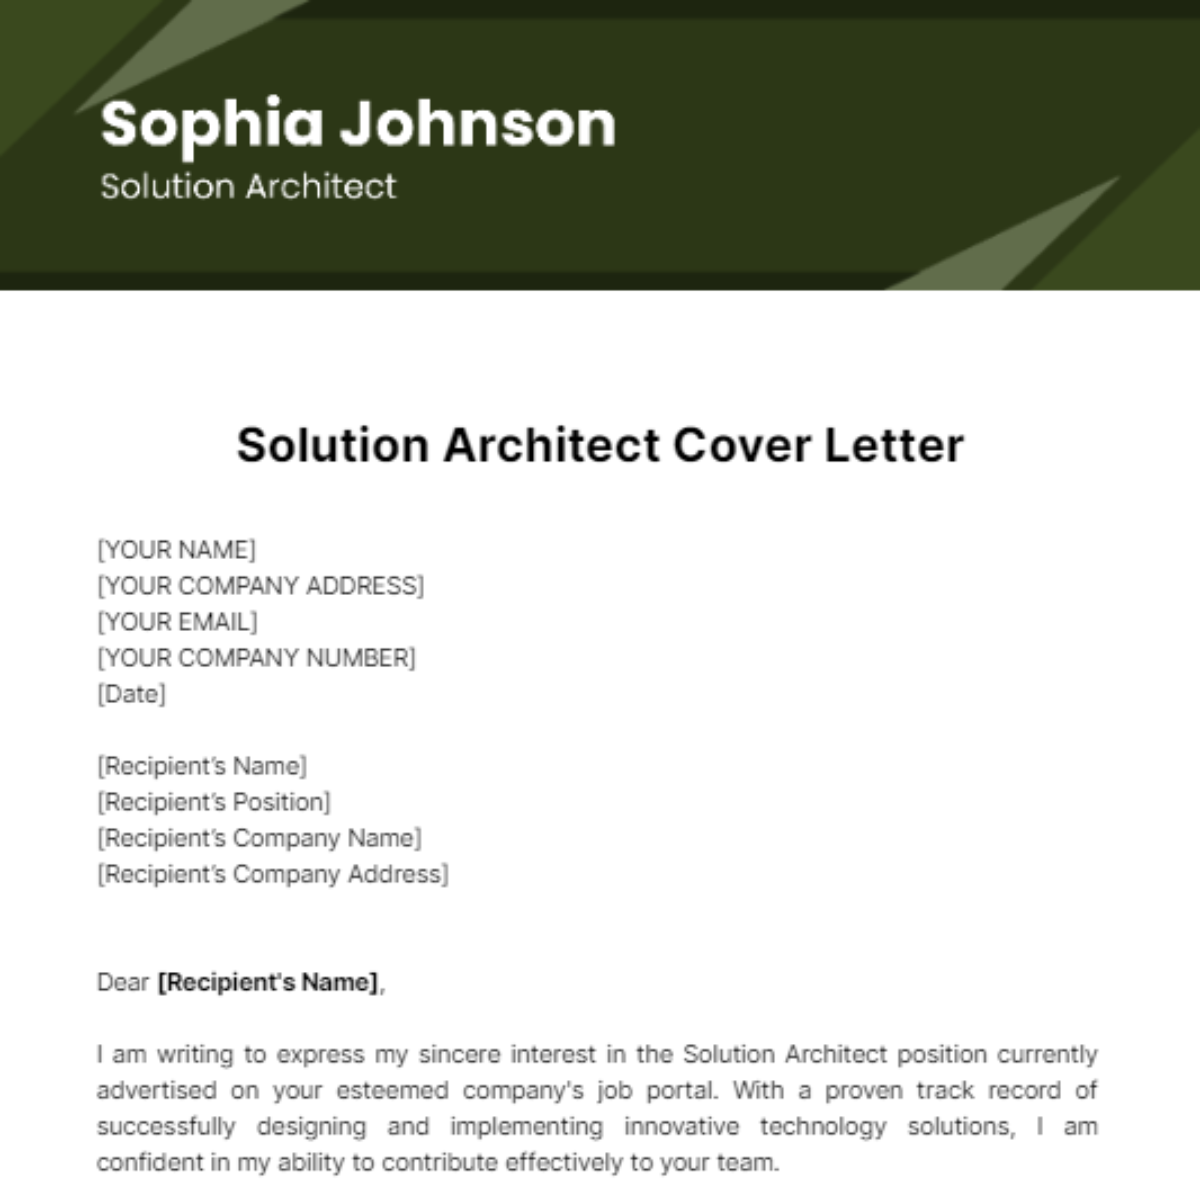 Solution Architect Cover Letter Template